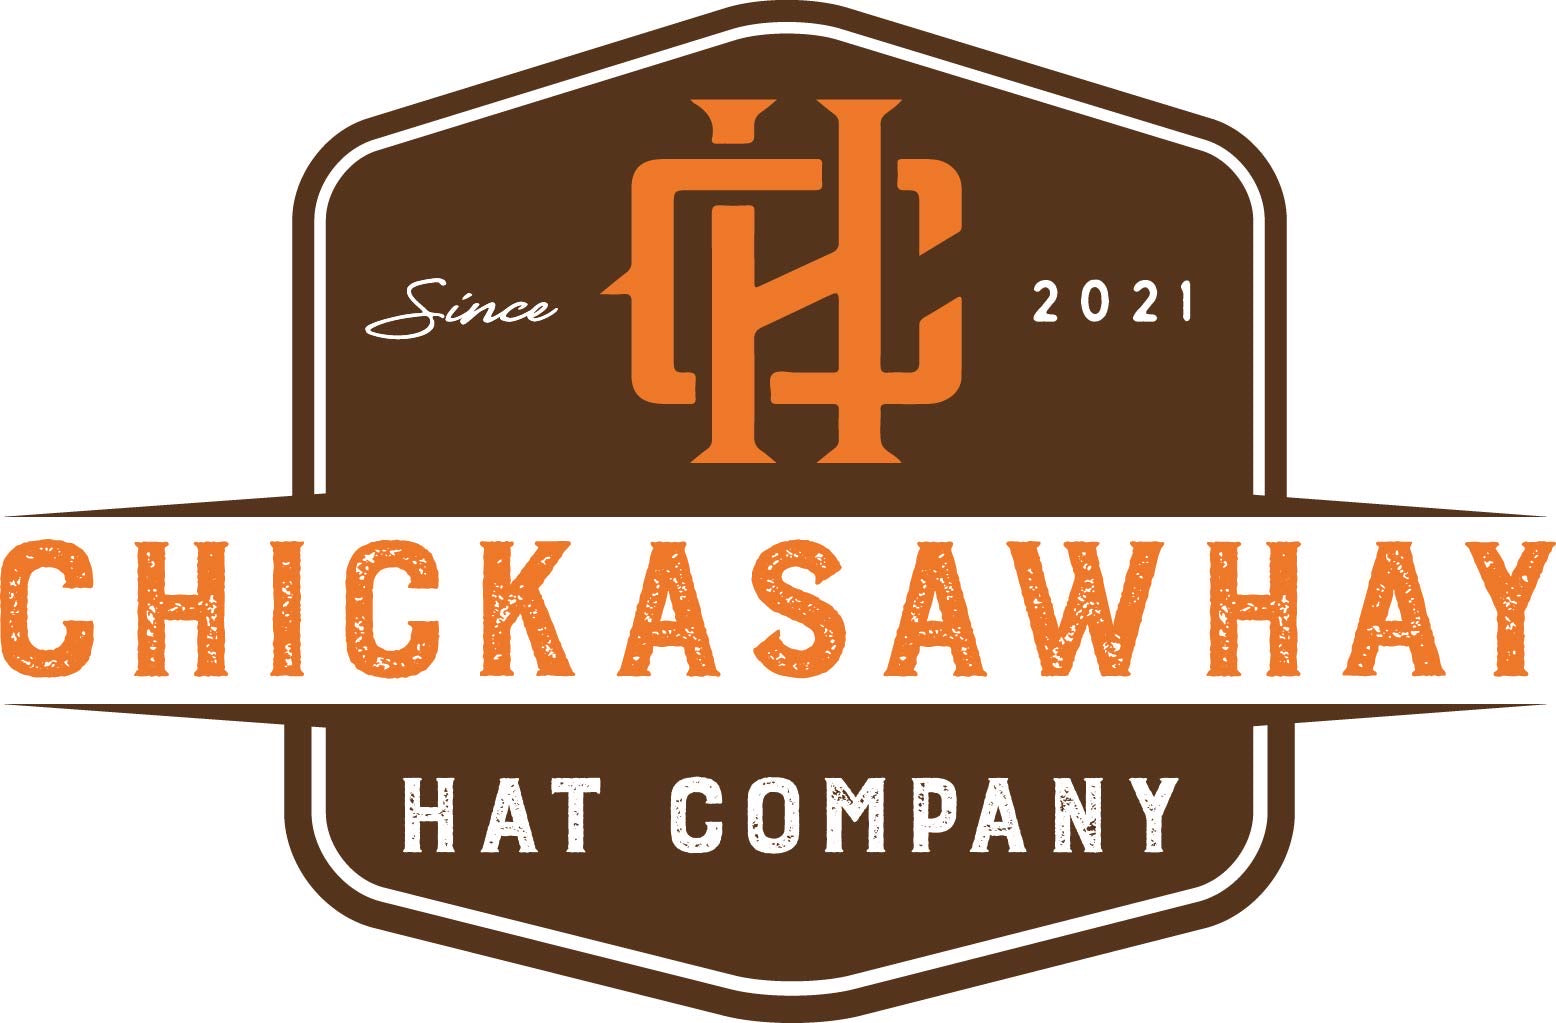 Chickasawhay Hat Co.